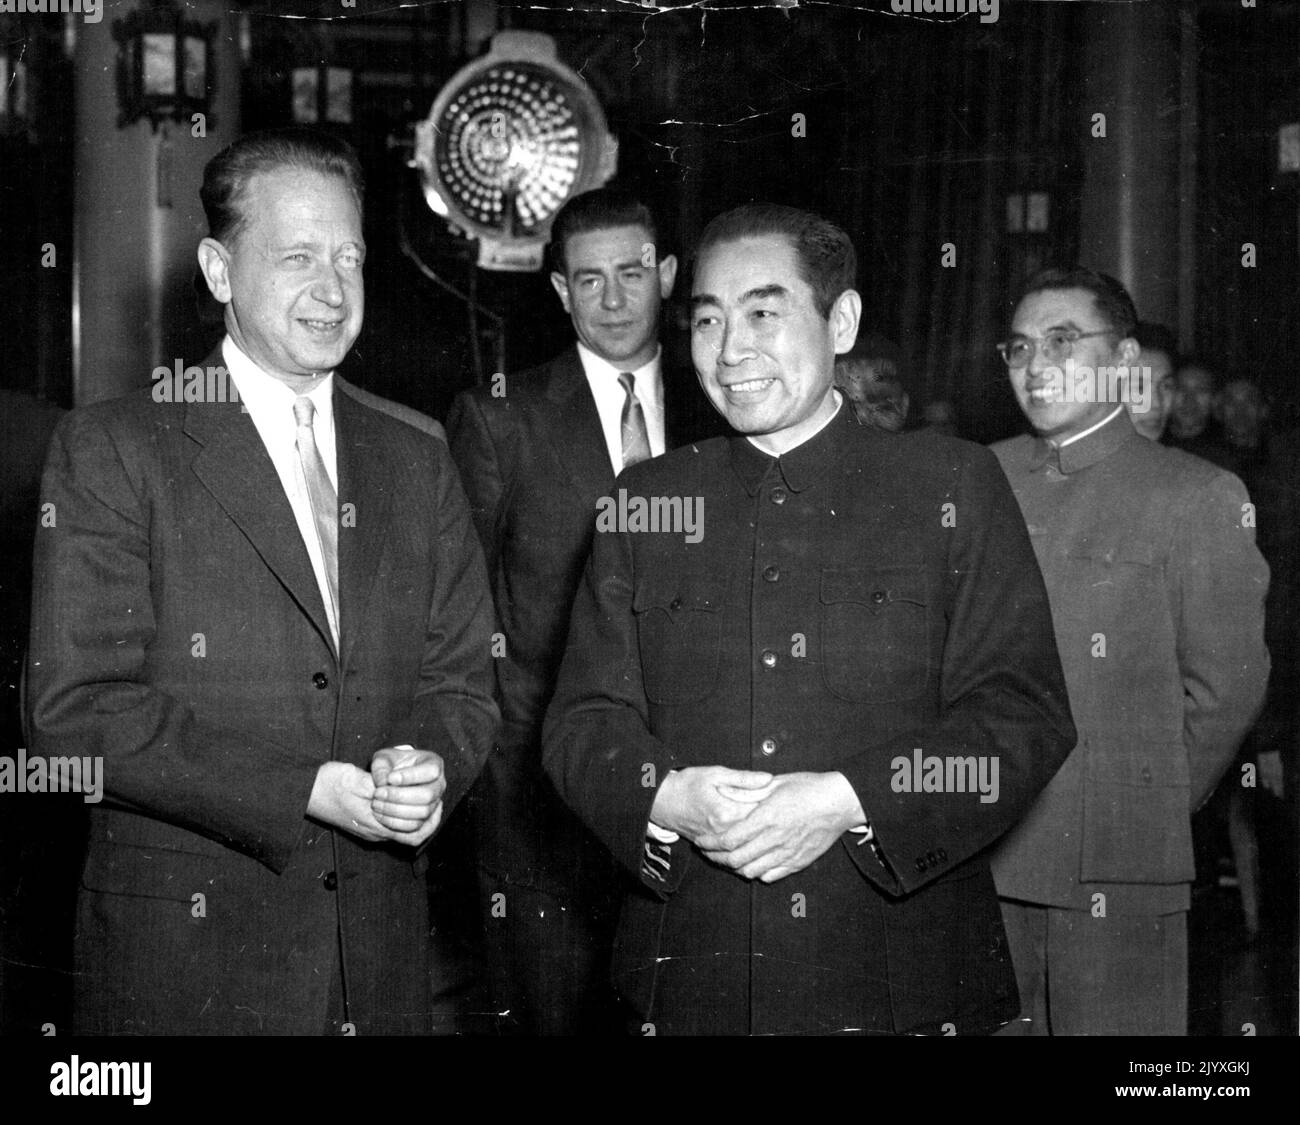 U.N. Secretary-General Meets Prime Minister Cho En-Lai - Secretary-General Dag Hammarskjold (left) of the United Nations who is now in Peking, is photographed here with Prime Minister Cho En-Lai of the Chinese People's Republic. Seen behind them are Mr. William Ranailo, an aide to Mr. Hammarskjold, and Chinese officials Mr. Hammarskjold went to China to seek, at the U.N General Assembly's request, the release of all detained U.N, Command personnel who wish to be repatriated, including II U.S. airmen sentenced to imprisonment on ***** charges by the Chinese People's Republic. January 10, 1955. Stock Photo